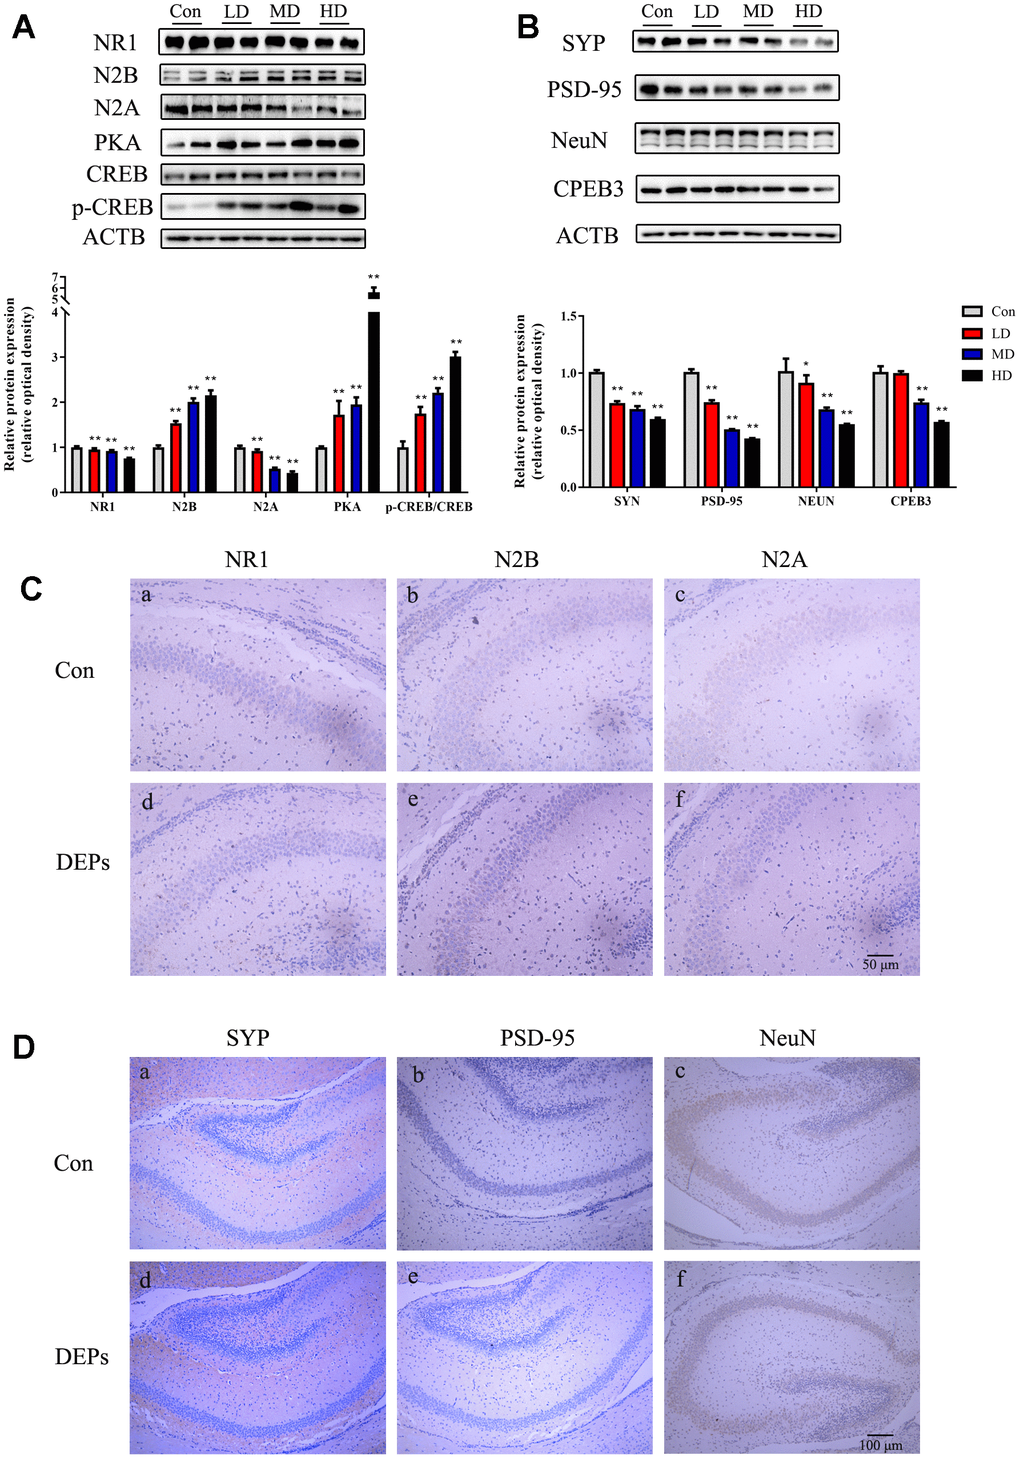 Protein expression of NMDA/PKA/CREB and CPEB3 signaling pathway-associated genes in hippocampus samples of 56 days male offspring mice. (A) Western blot analysis of p-CREB, CREB, PKA, N2A, N2B and NR1 protein in hippocampus. (B) Western blot analysis of CPEB3, NEUN, PSD-95 and SYN protein in hippocampus. (C) Immunohistochemical analysis of NR1, N2B and N2A protein in hippocampus. (a–c) Control group (CON). (d–f) DEPs treatment groups (DEPs, the MD group). (D) Immunohistochemical analysis of SYN, PSD-95 and NEUN protein in hippocampus. (a–c) Control group (CON). (d–f) DEPs treatment groups (DEPs, the MD group). The values shown are the mean ± SD of (NAB=9, NCD=3). Compared to control; * p p 